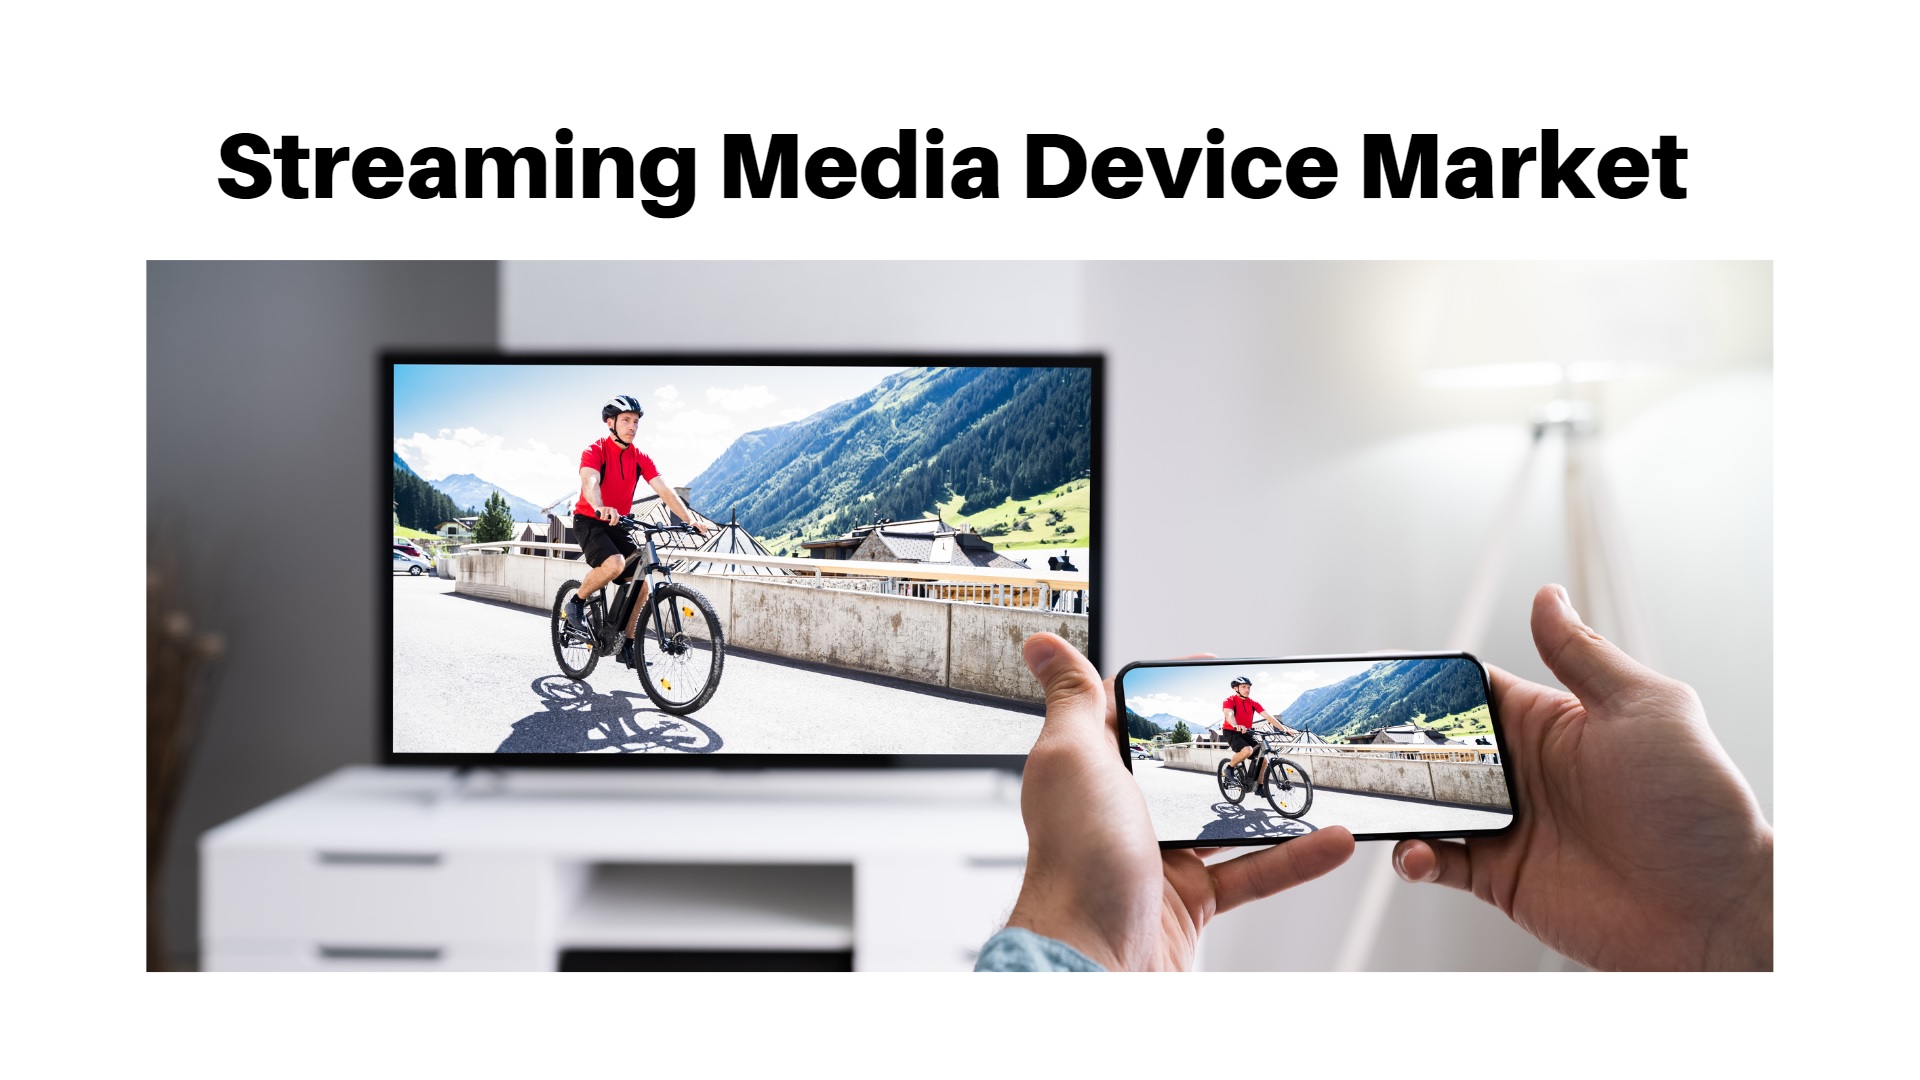 Global Streaming Media Device Market To Accrue Nearly USD 1229.68 Bn By 2033